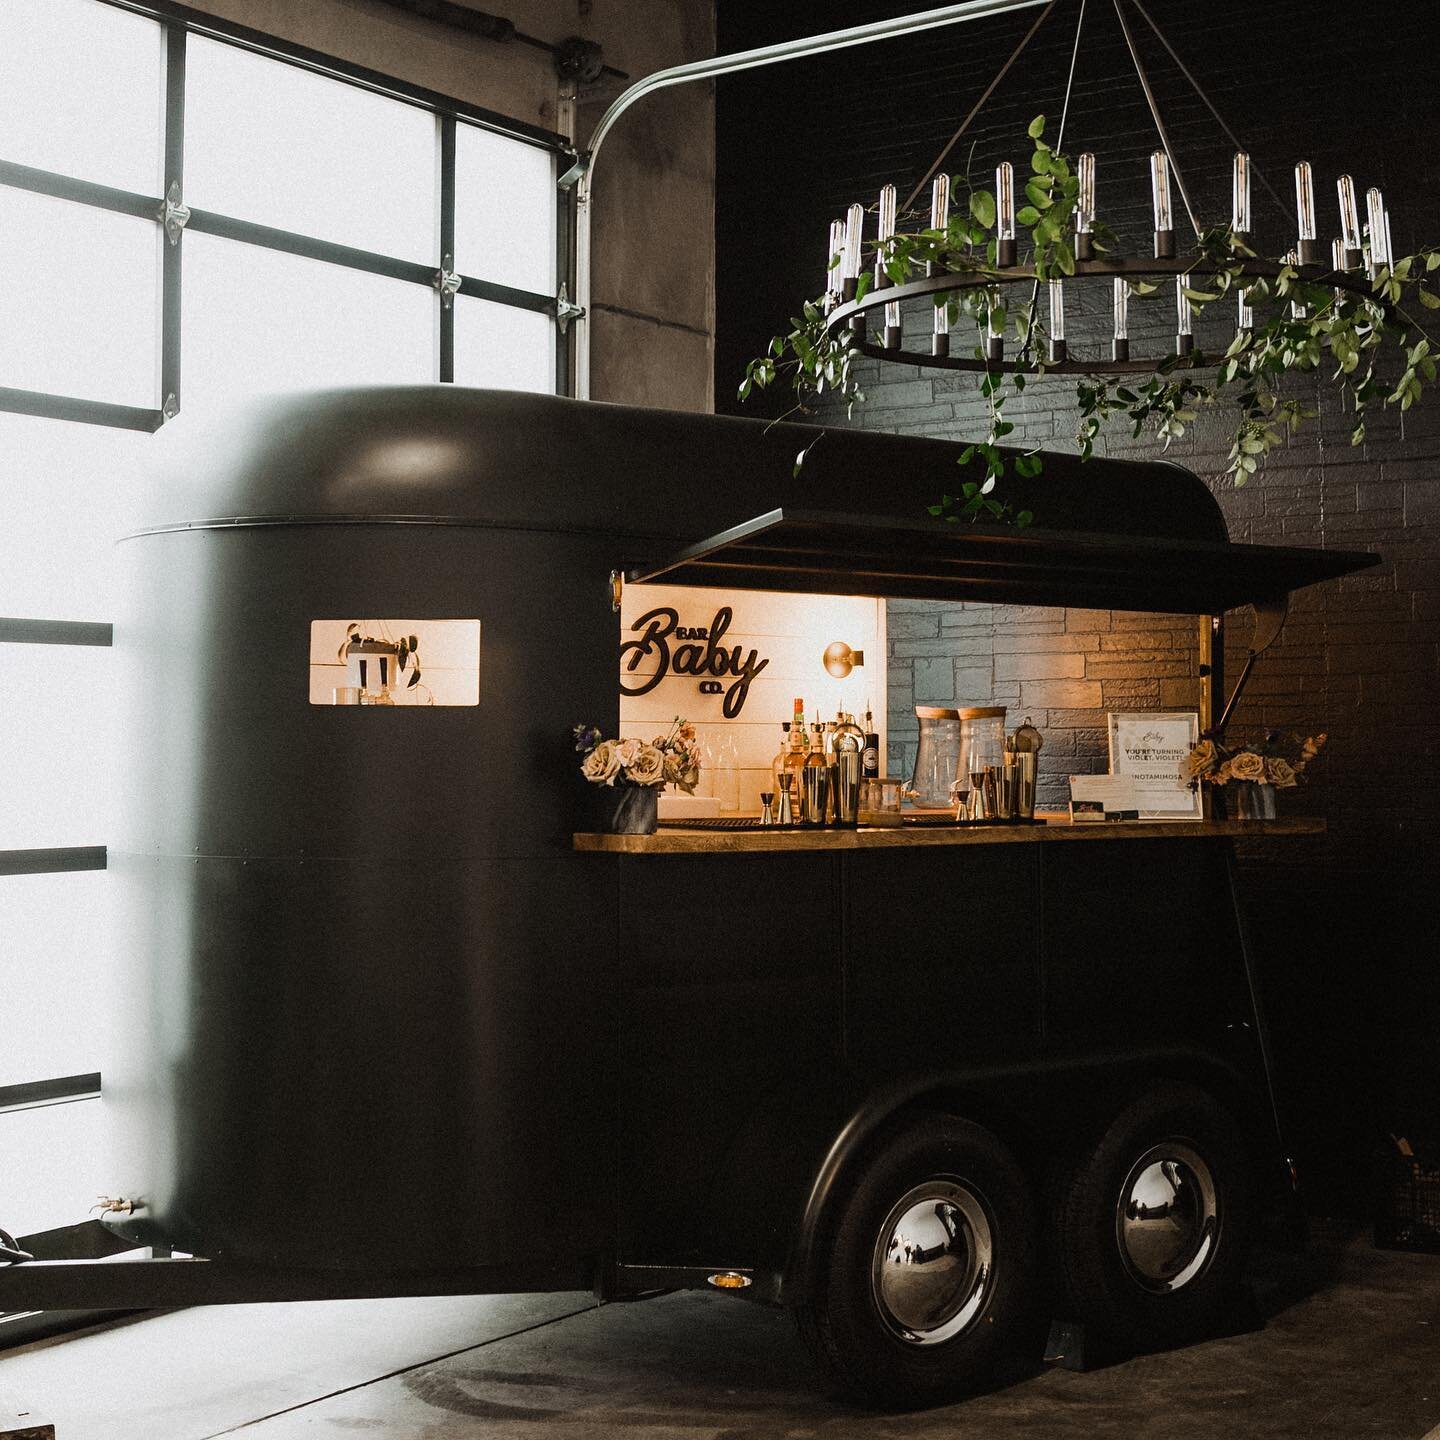 Are you hosting a Friendsgiving or holiday party this year?? Hire our fun and talented team of mixologists to make it extra special! 

Don&rsquo;t have space for our bar trailer? No problem! Drop us an email to cheers@barbabyco.com and let&rsquo;s ch